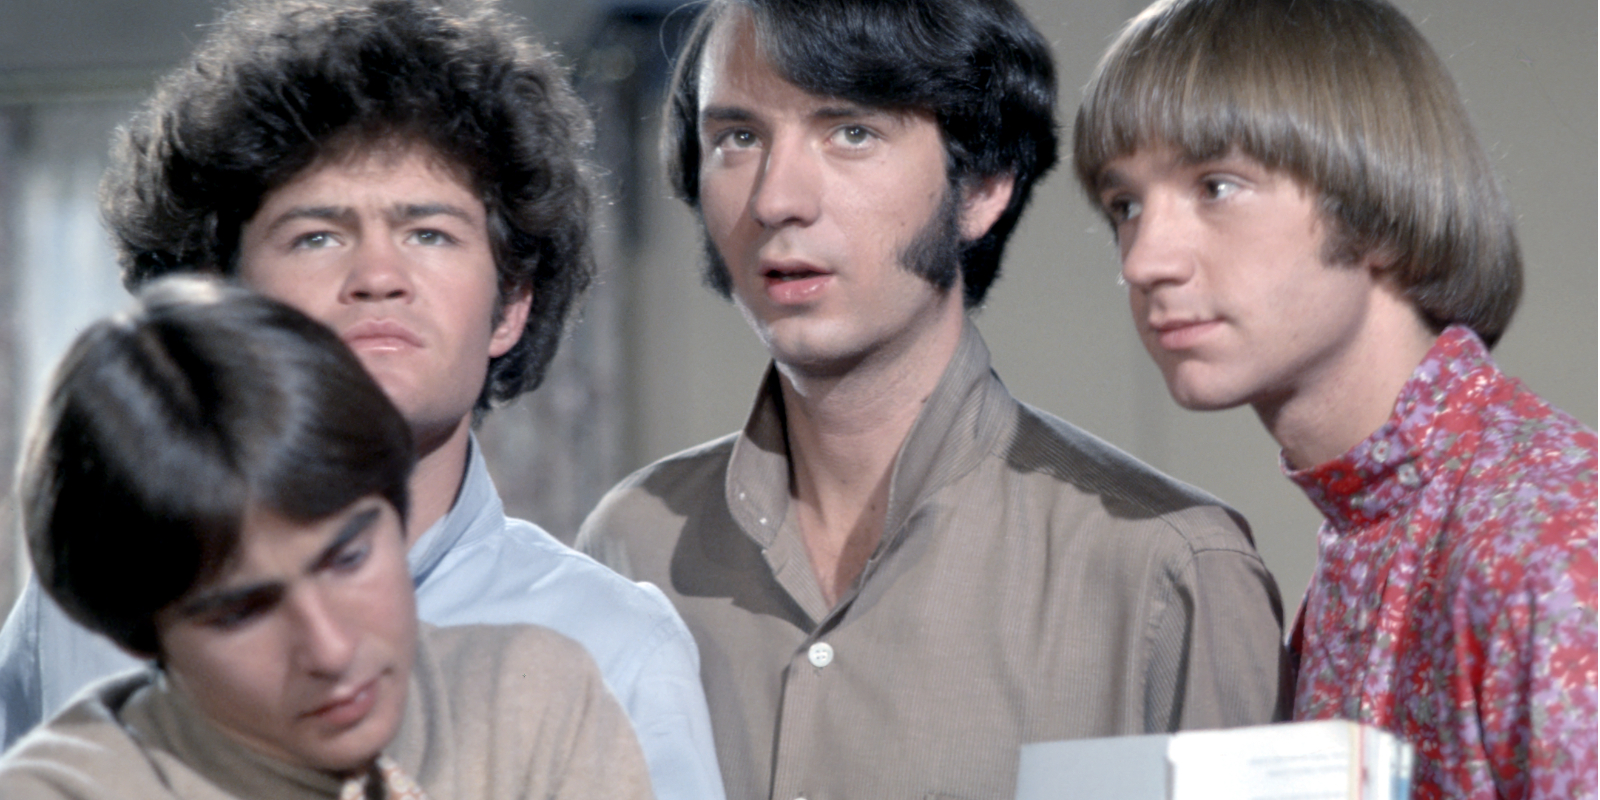 Davy Jones, Micky Dolenz, Mike Nesmith, and Peter Tork of the television series 'The Monkees.'